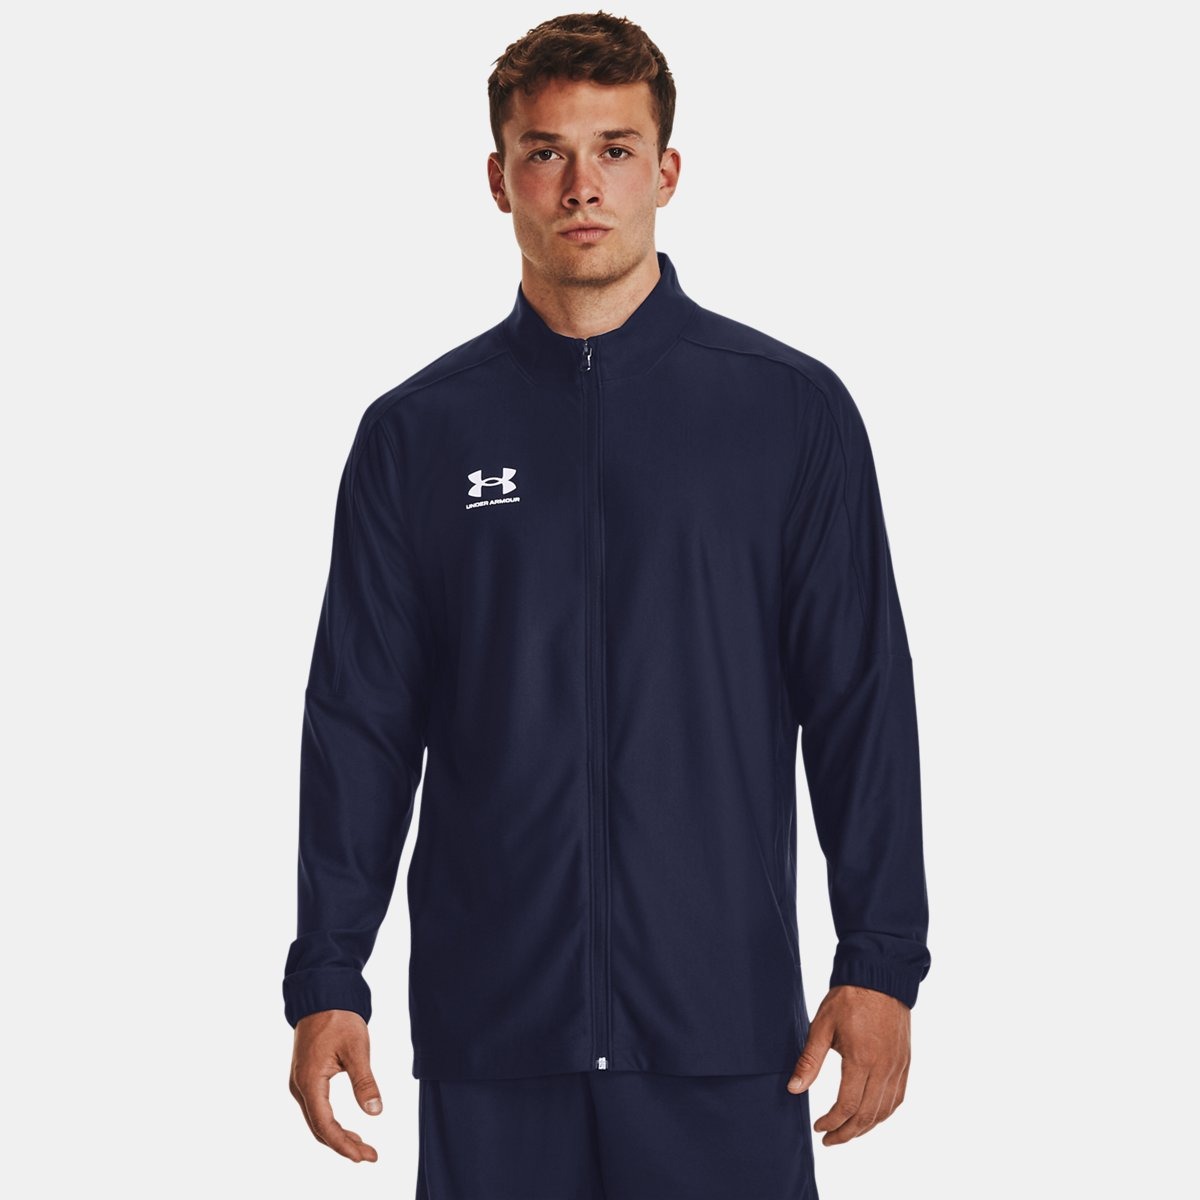 Blue Jacket for Man from Under Armour GOOFASH